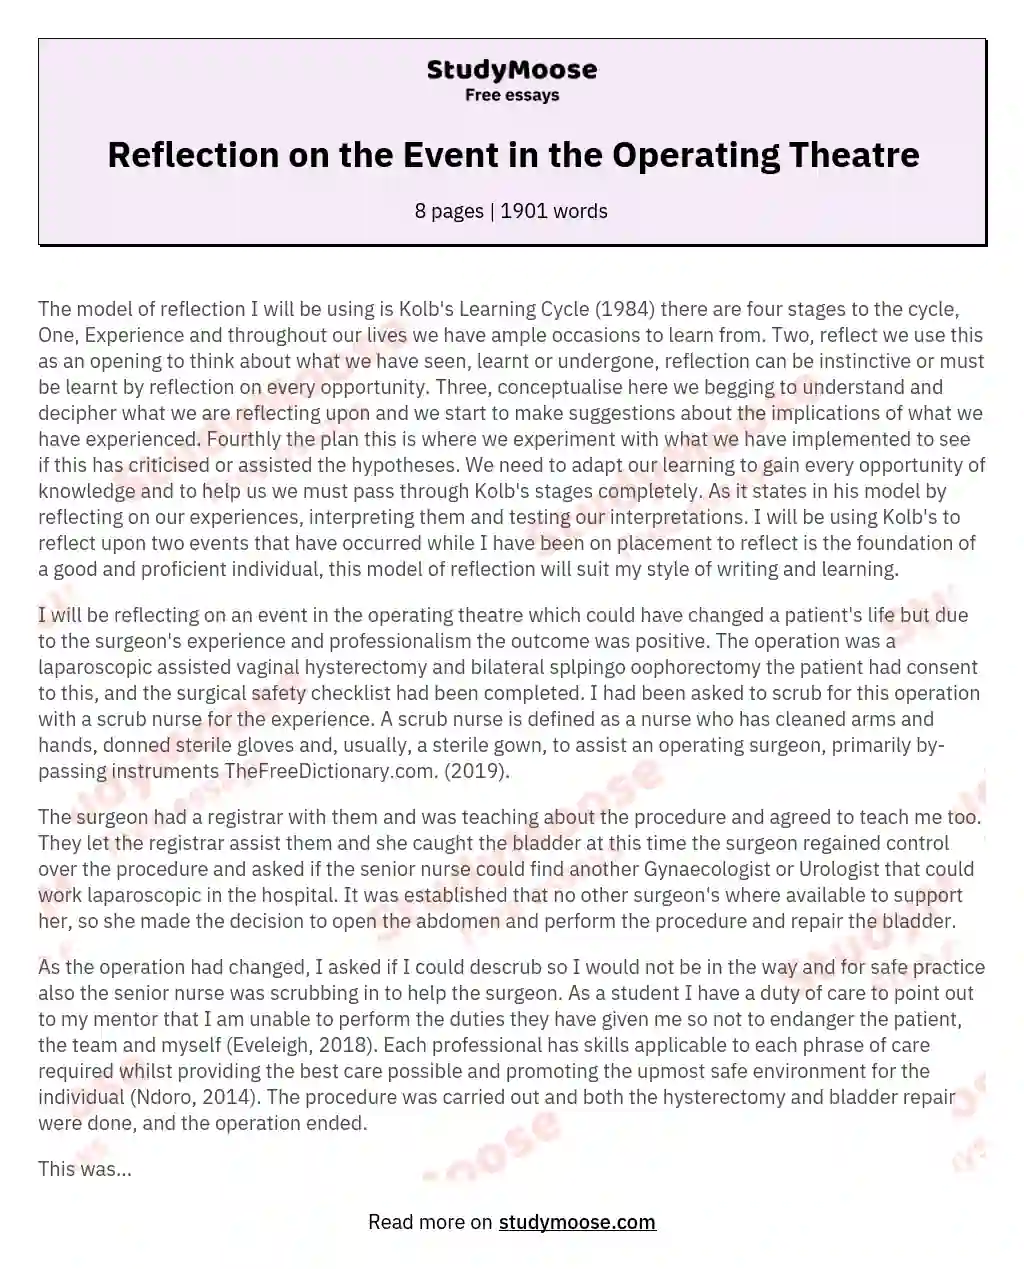 Reflection on the Event in the Operating Theatre essay